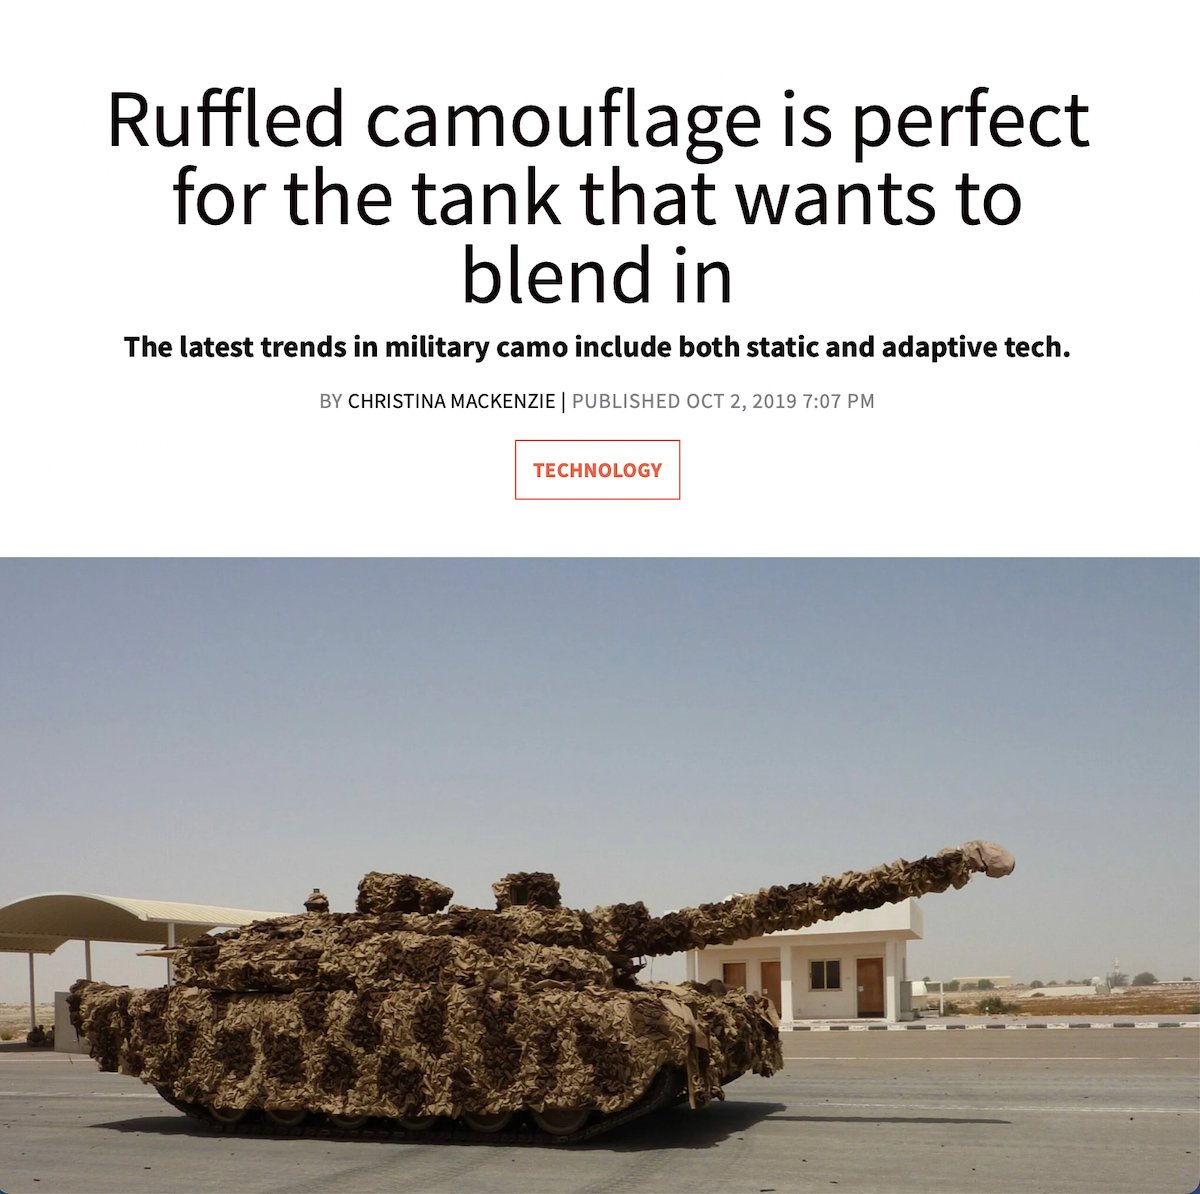 Ruffled camouflage is perfect for the tank that wants to blend in